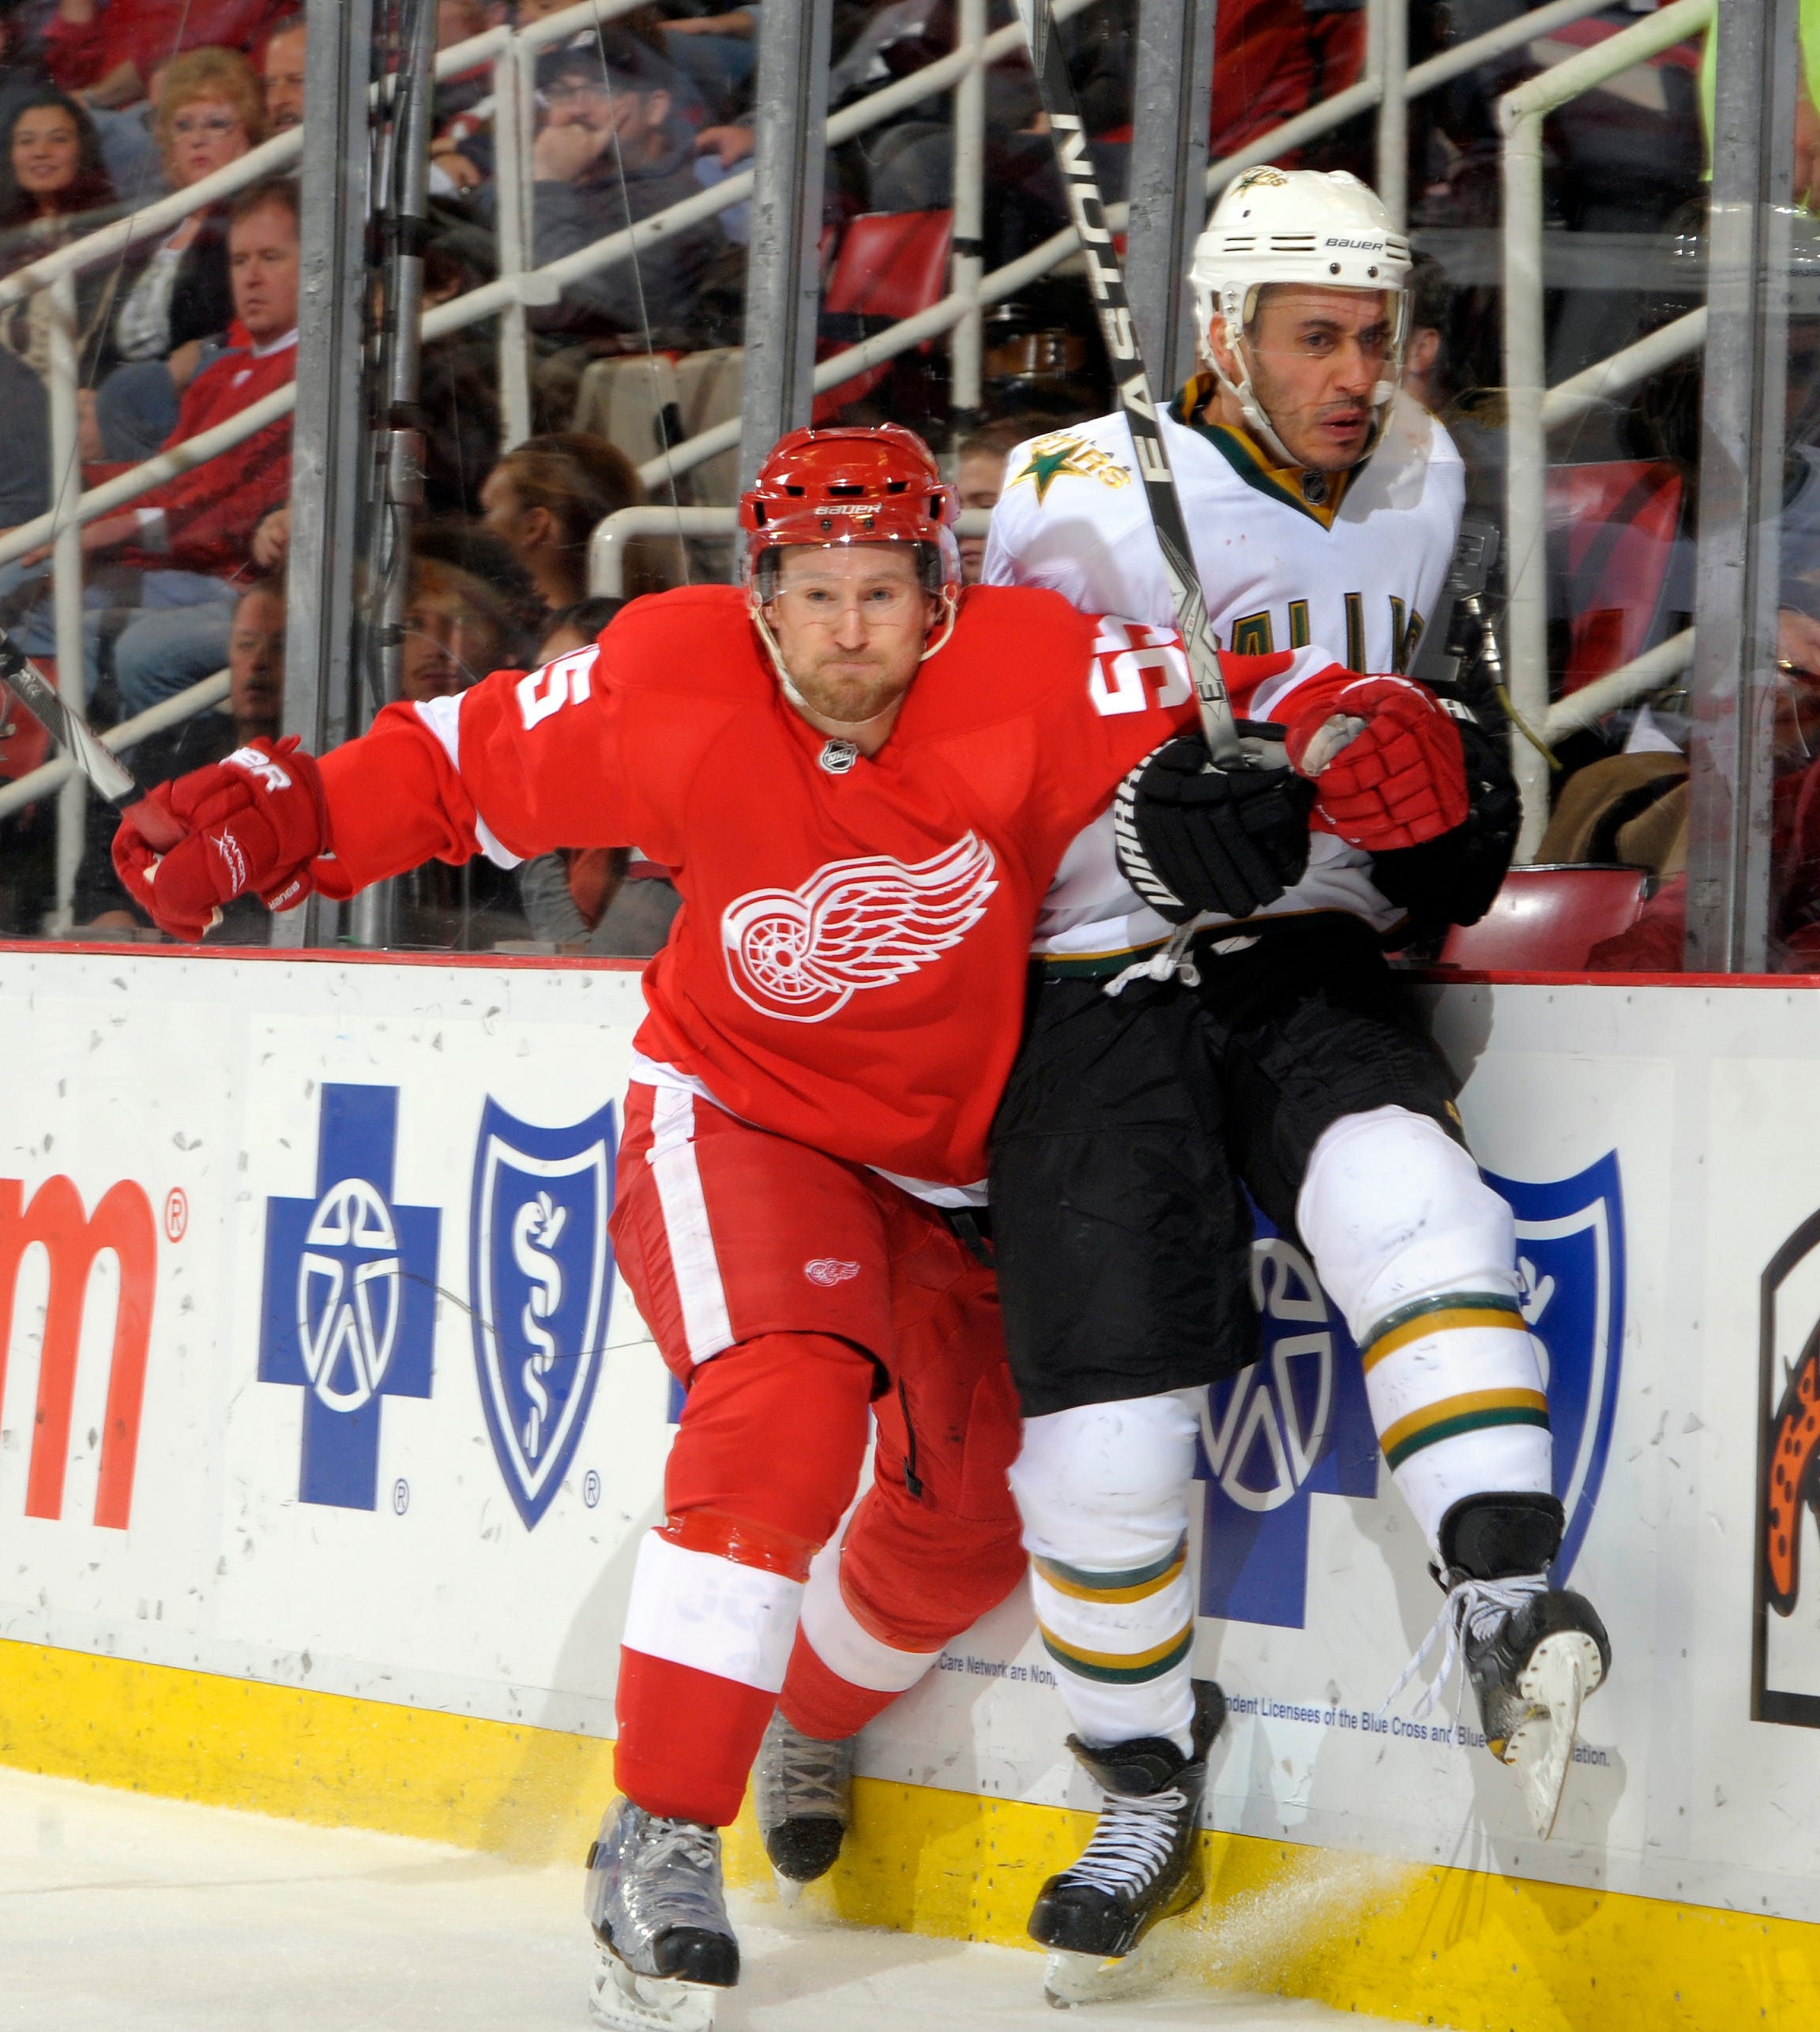 Detroit ' s Niklas Kronwall and Dallas ' Mike Ribeiro collide along the boards during a game at Joe Louis Arena on Dec. 19, 2010.